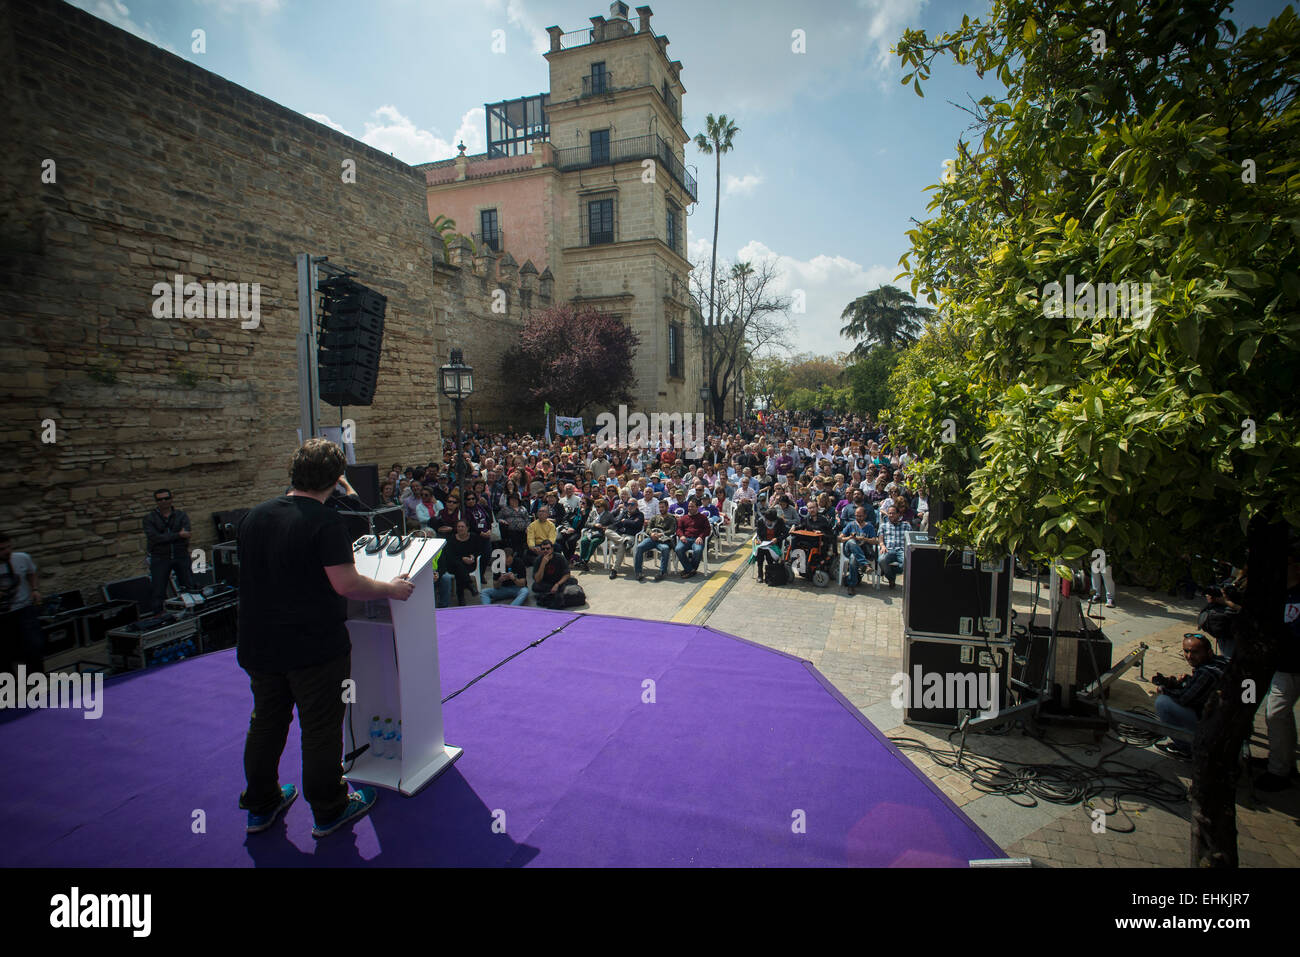 Jerez de la Frontera, Andalusia, Spain, 15 March, 2015: Miguel Urbán, Member of the European Parliament for Podemos, speaking at a rally for Teresa Rodríguez candidate of Podemos in the elections of Andalusia, in rally Jerez de la Frontera. Stock Photo